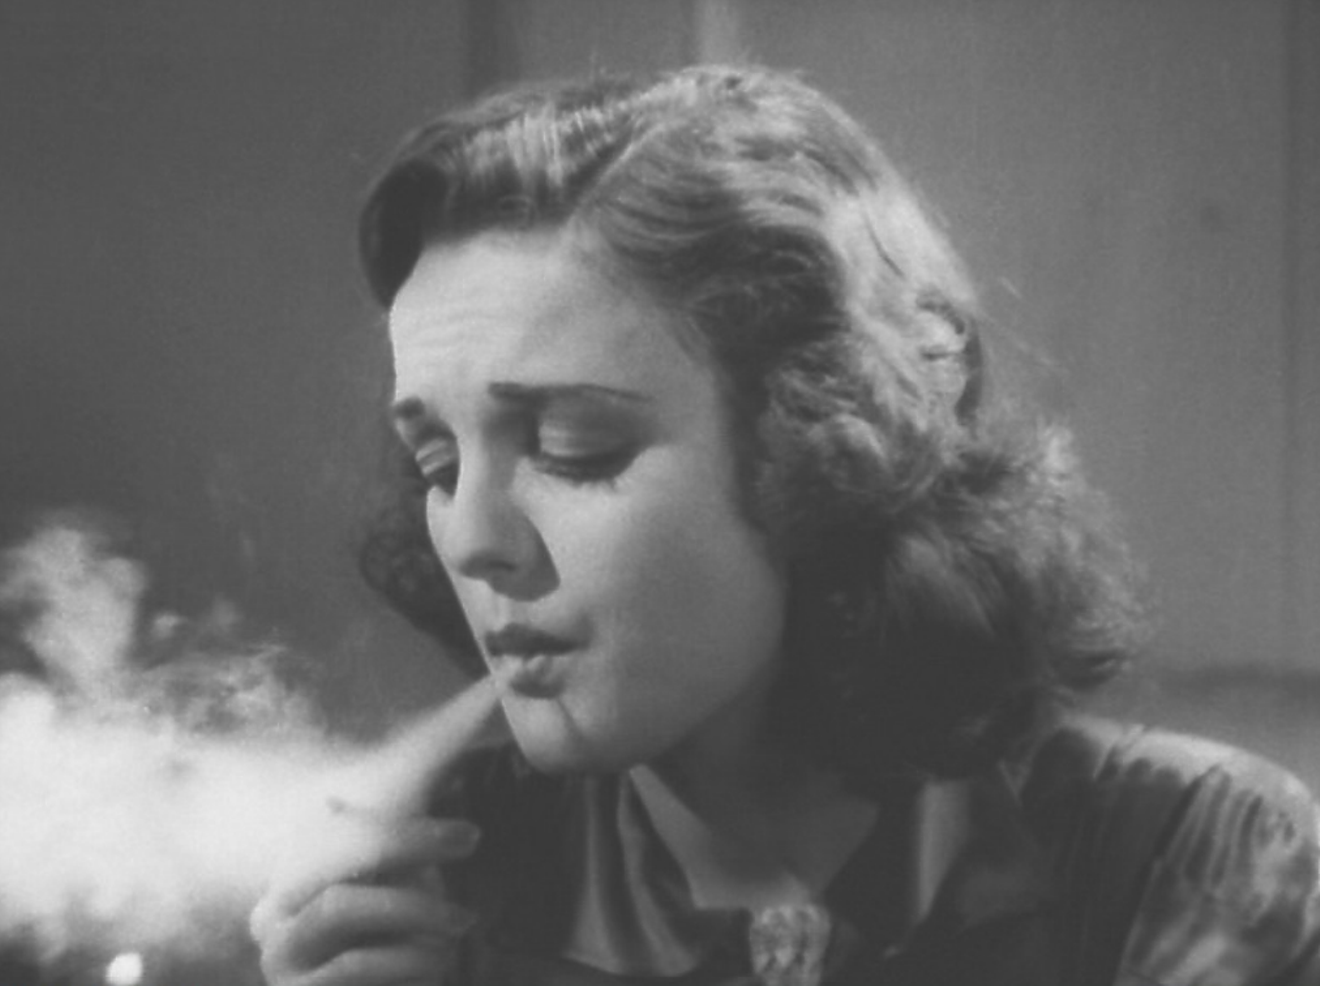 We thought Netflix was already as stoner friendly as it gets, but Weed and Whiskey TV proved us wrong. A still from Reefer Madness, one of the films available on the Deep Ellum-based streaming channel.